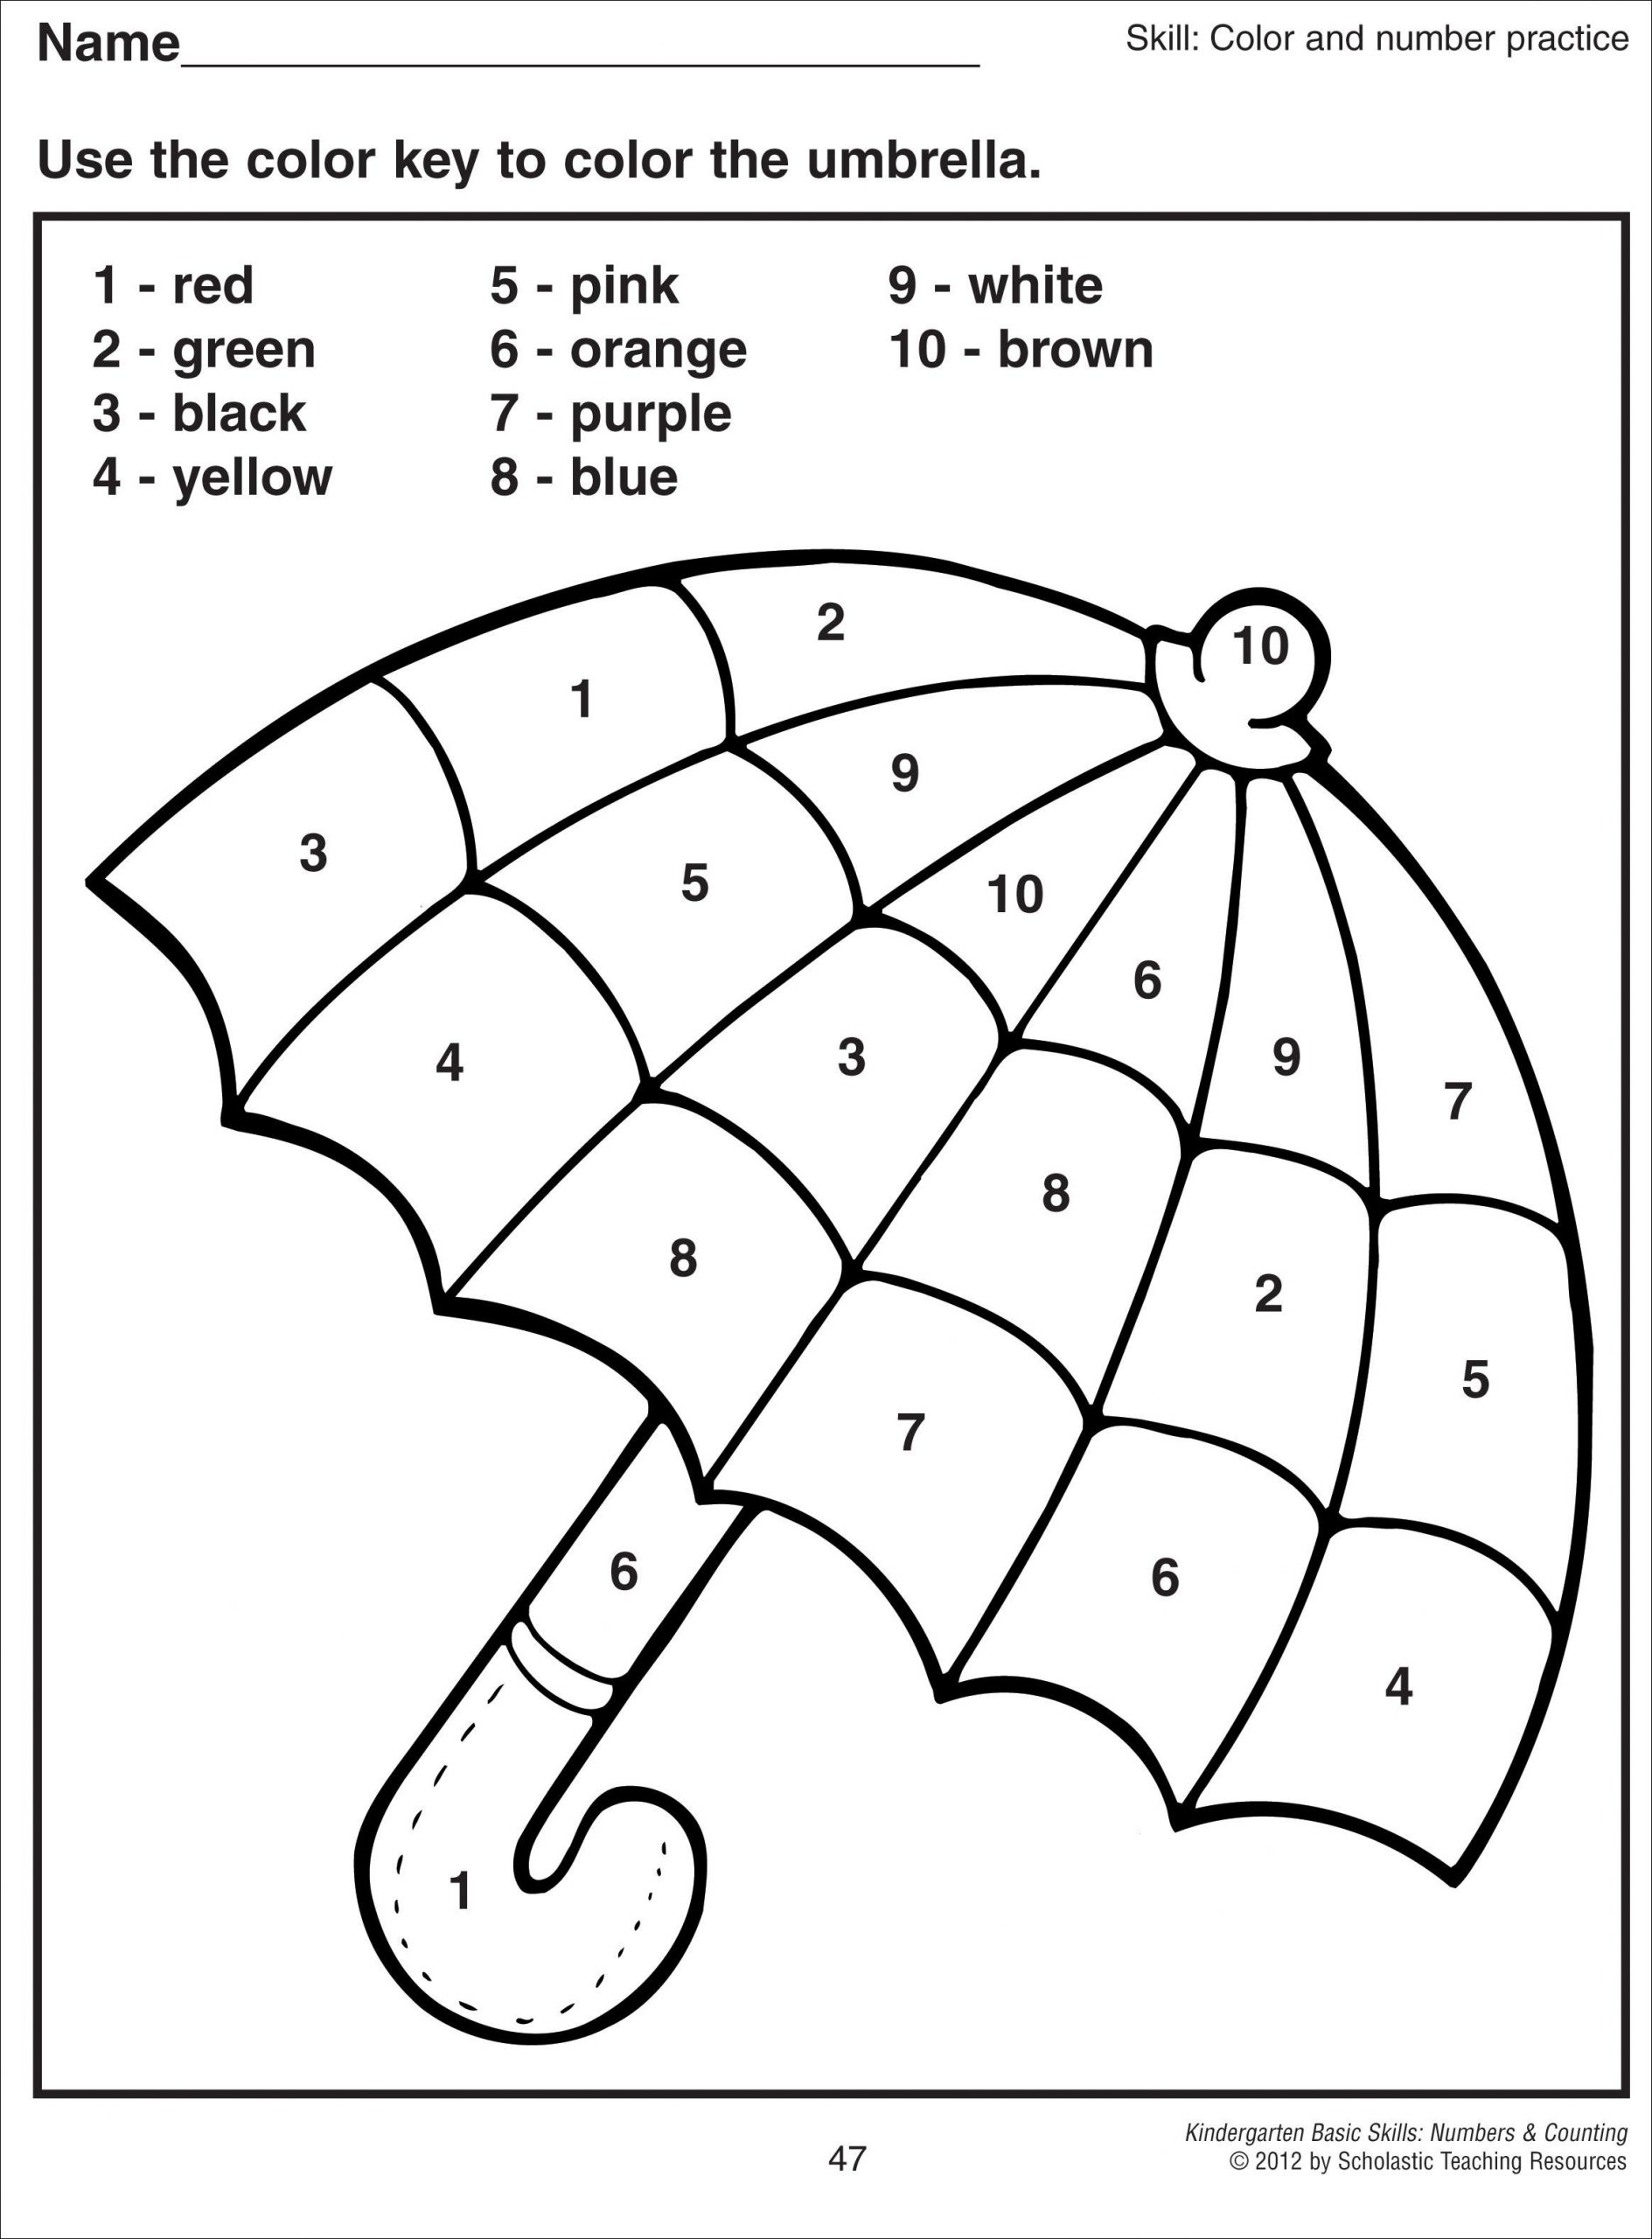 math worksheet : Coloring Pages Top Notch Lovely Color Number For Red  Worksheets Toddlers Kindergarten Fun Worksheet Free Printable Christmas  Sheets Scaled Teens Easy Summer Preschoolooks Pdf 61 Staggering Free  Printable Color